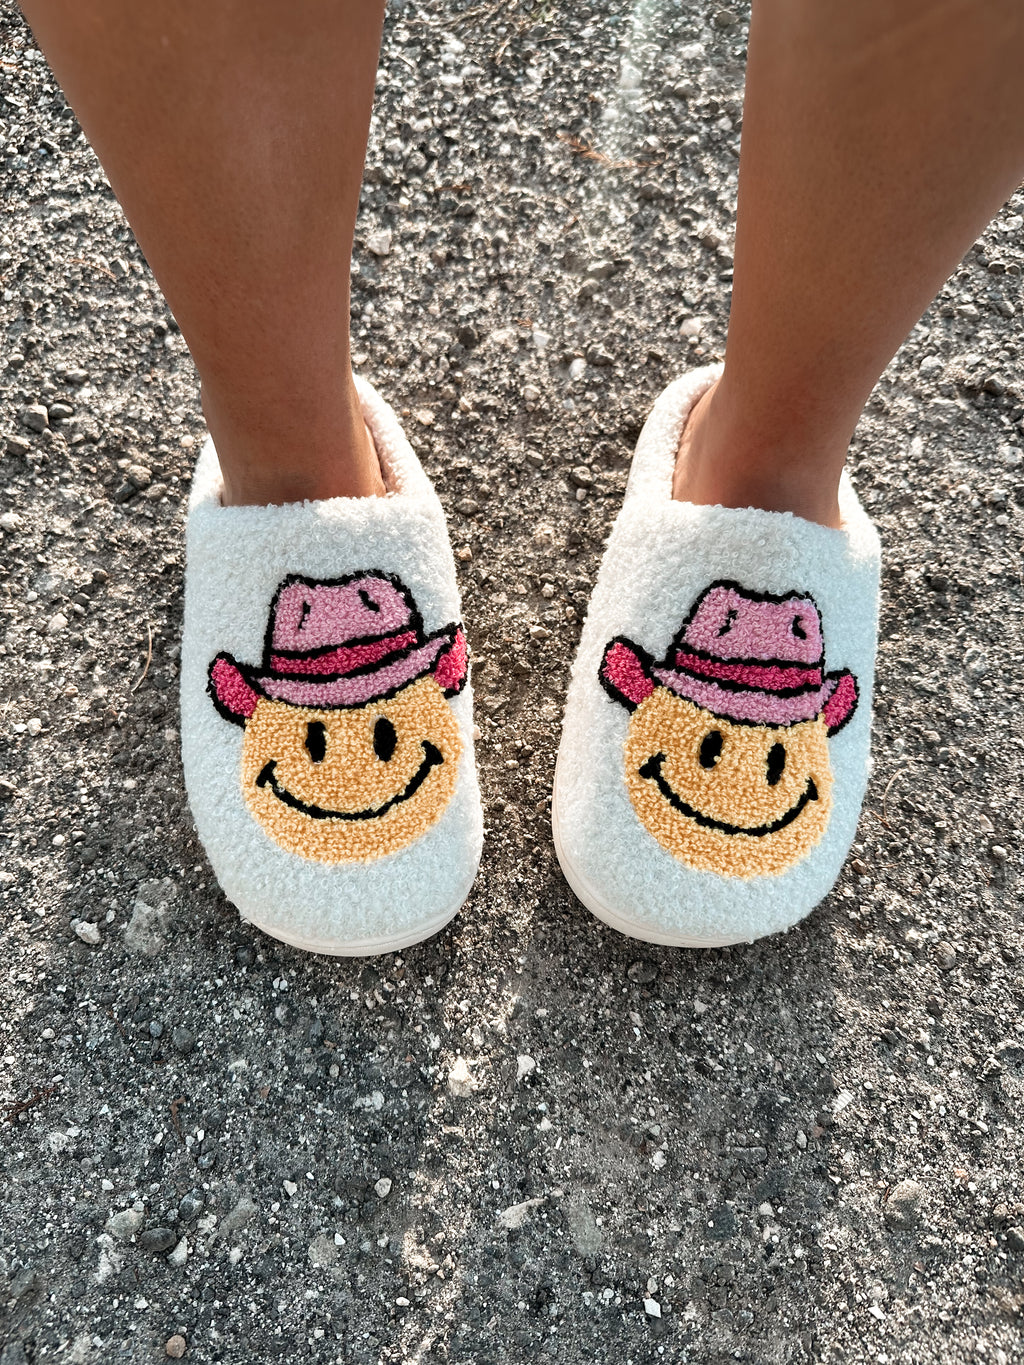 Yeehaw! Spruce Up Your Feet with Cowboy Smiley Face Slippers